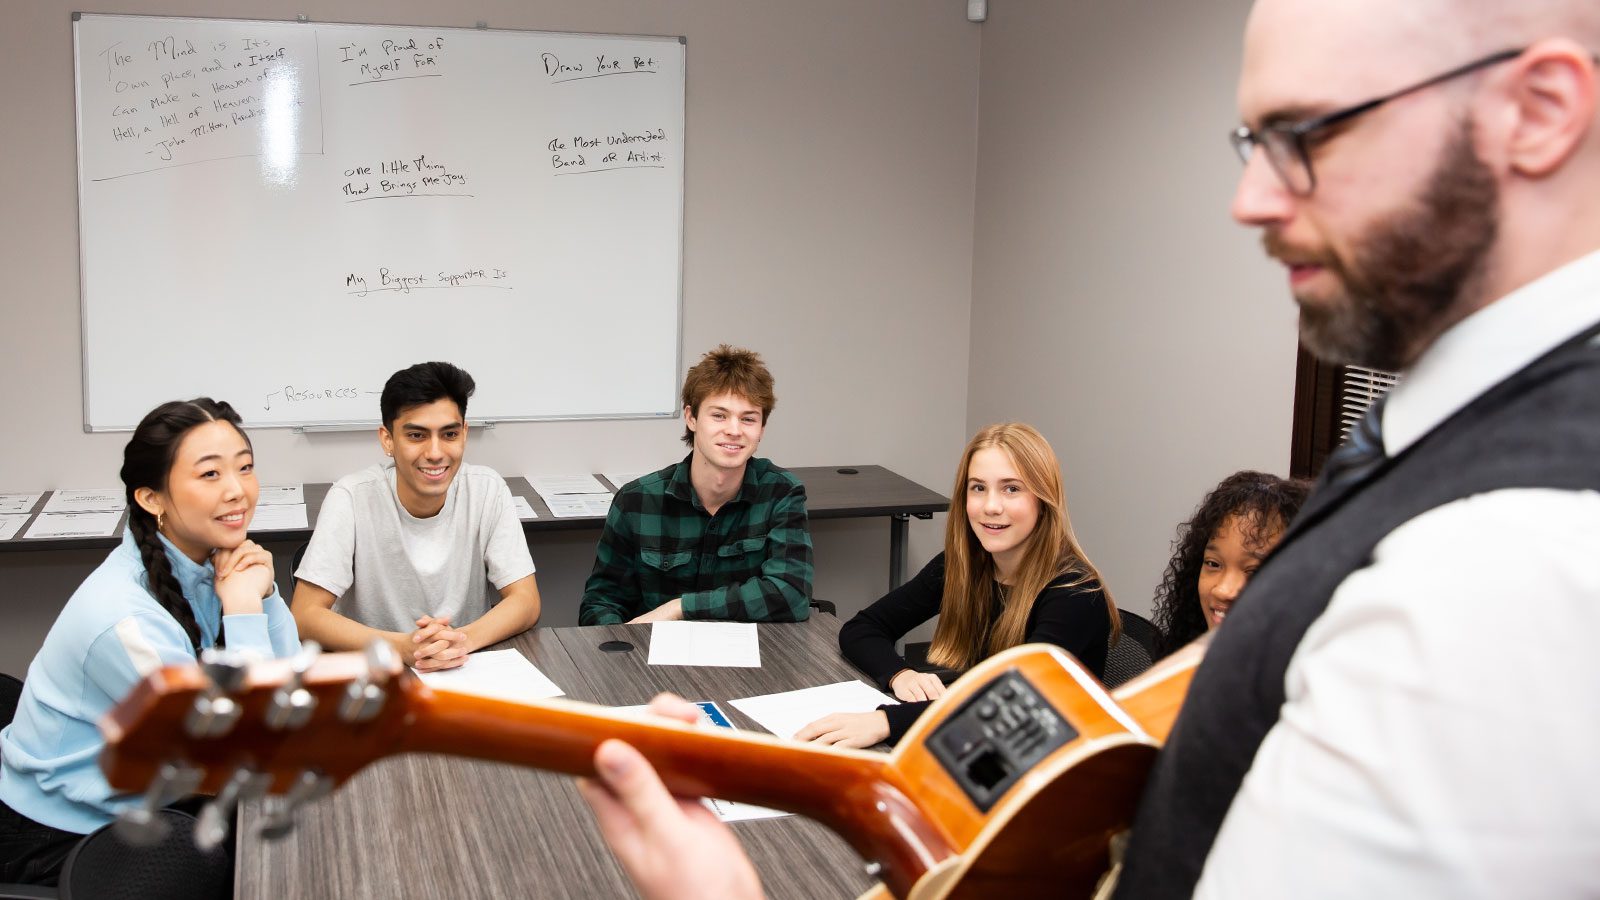 A music therapy session with a group of young people smiling and paying attention to a person holding a guitar.